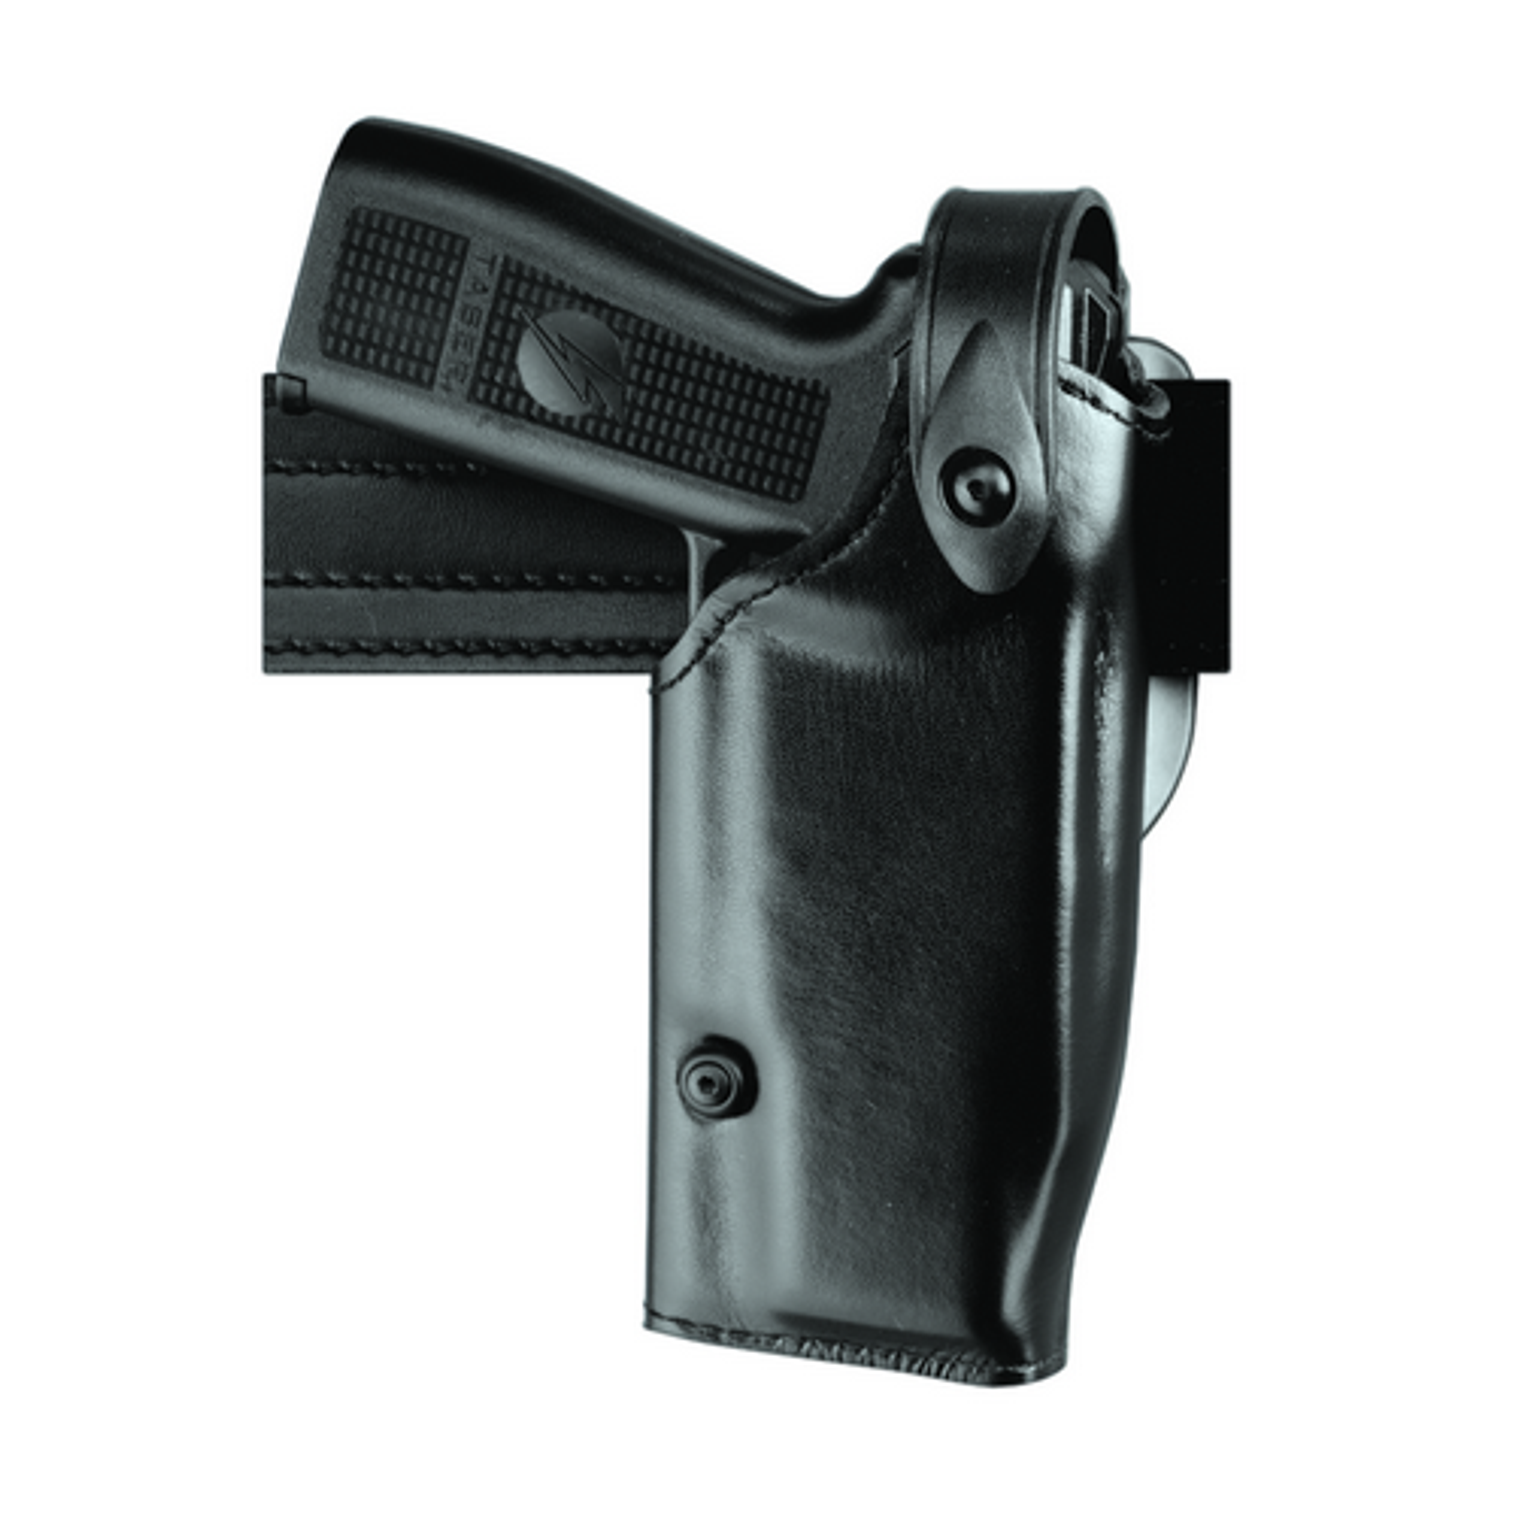 Model 6280 Sls Mid-ride Level Ii Retention Duty Holster For Sig Sauer P225